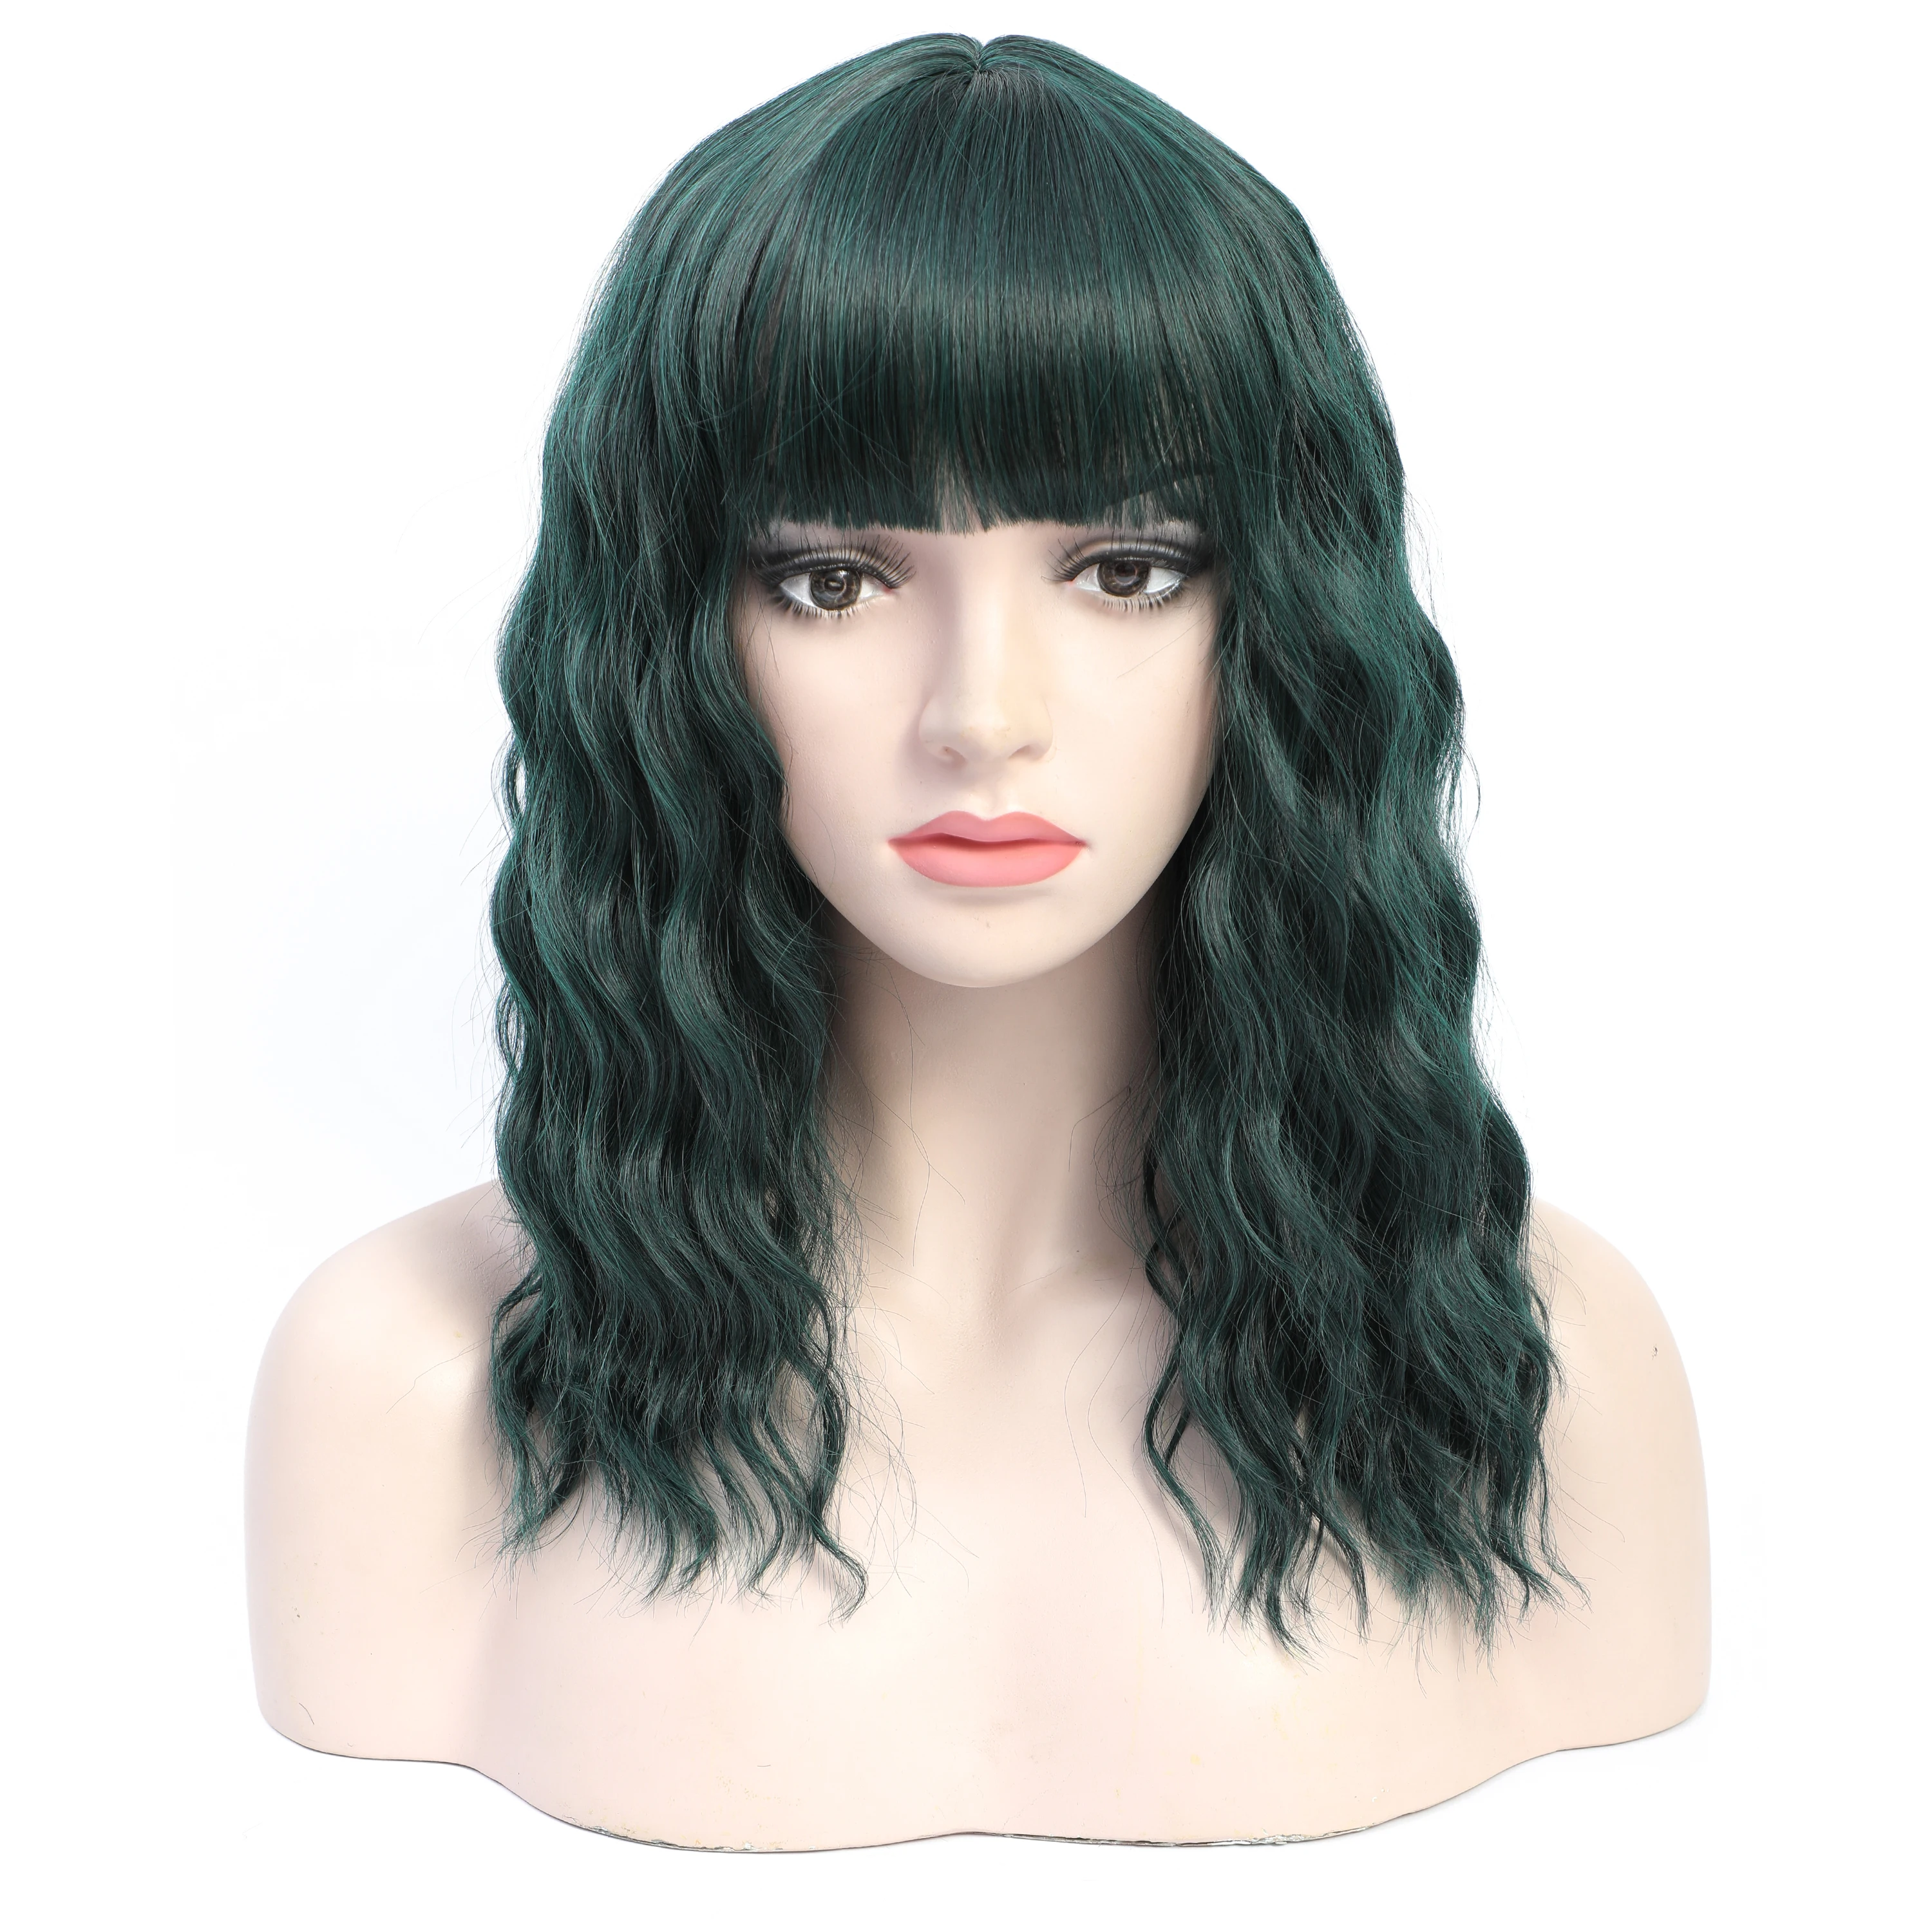 

16 Inches Long Wavy Green Wigs For Women with Bangs For Femal Daily Use Cosplay Lolita Wigs Heat Resistant Toupee